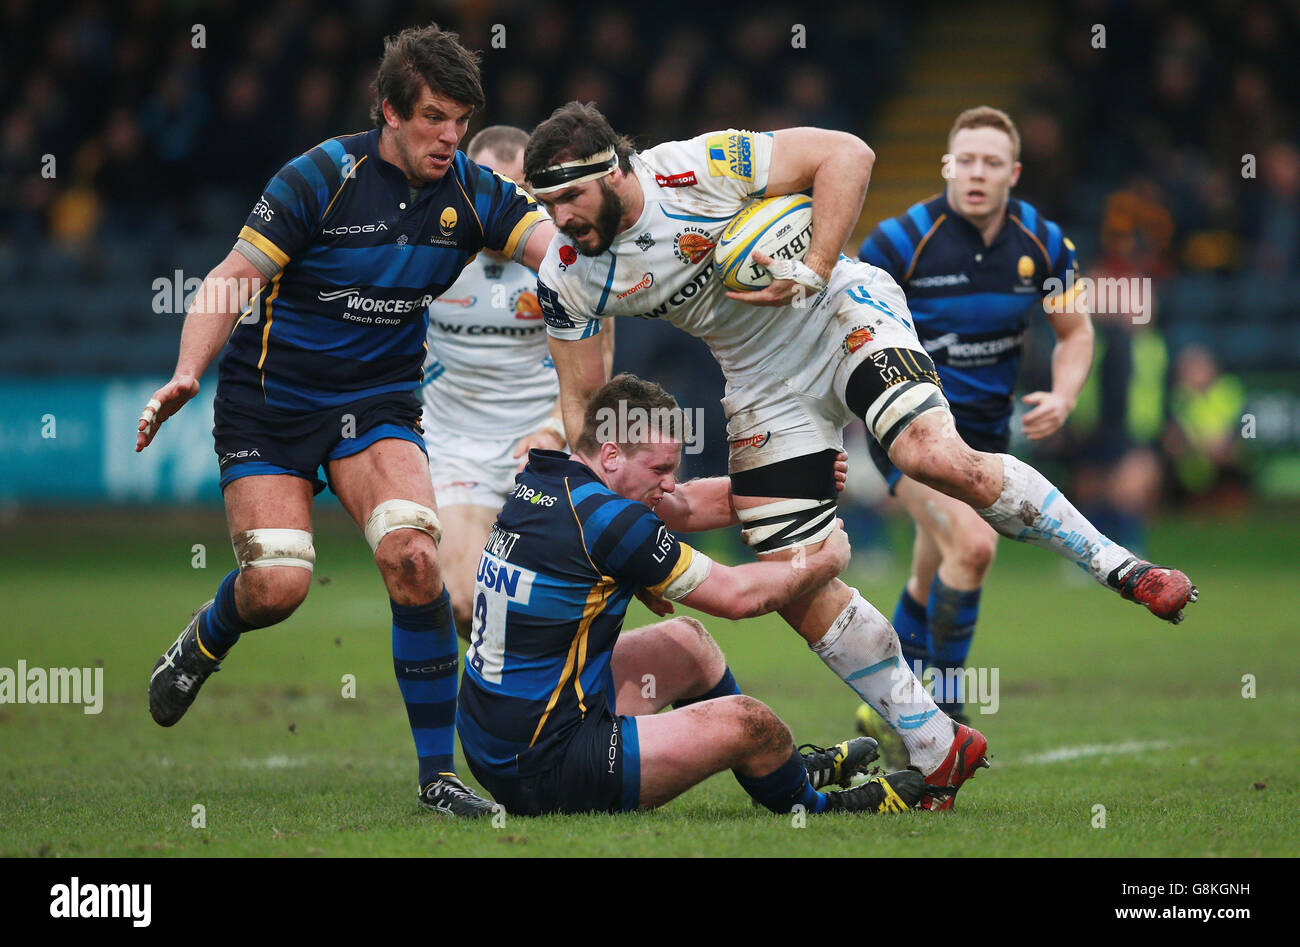 Exeter Chiefs' Don Armand is tackled by Worcester Warriors Niall Annett (floor) and Donncha O'Callaghan during the Aviva Premiership match at the Sixways Stadium, Worcester. PRESS ASSOCIATION Photo. Picture date: Sunday January 31, 2016. See PA story RUGBYU Worcester. Photo credit should read: David Davies/PA Wire. Stock Photo